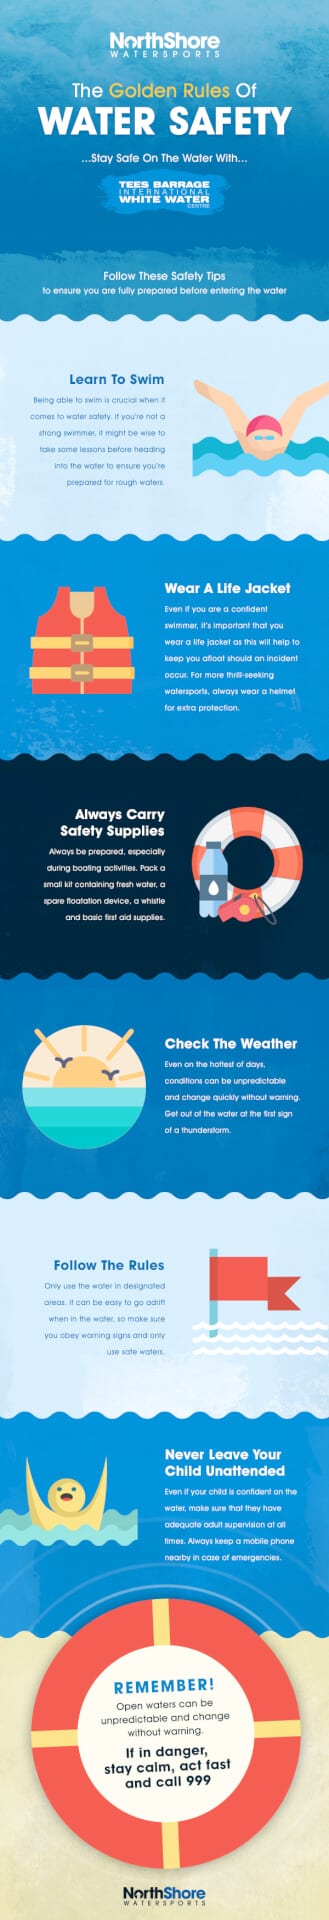 The Golden Rules of Water Safety